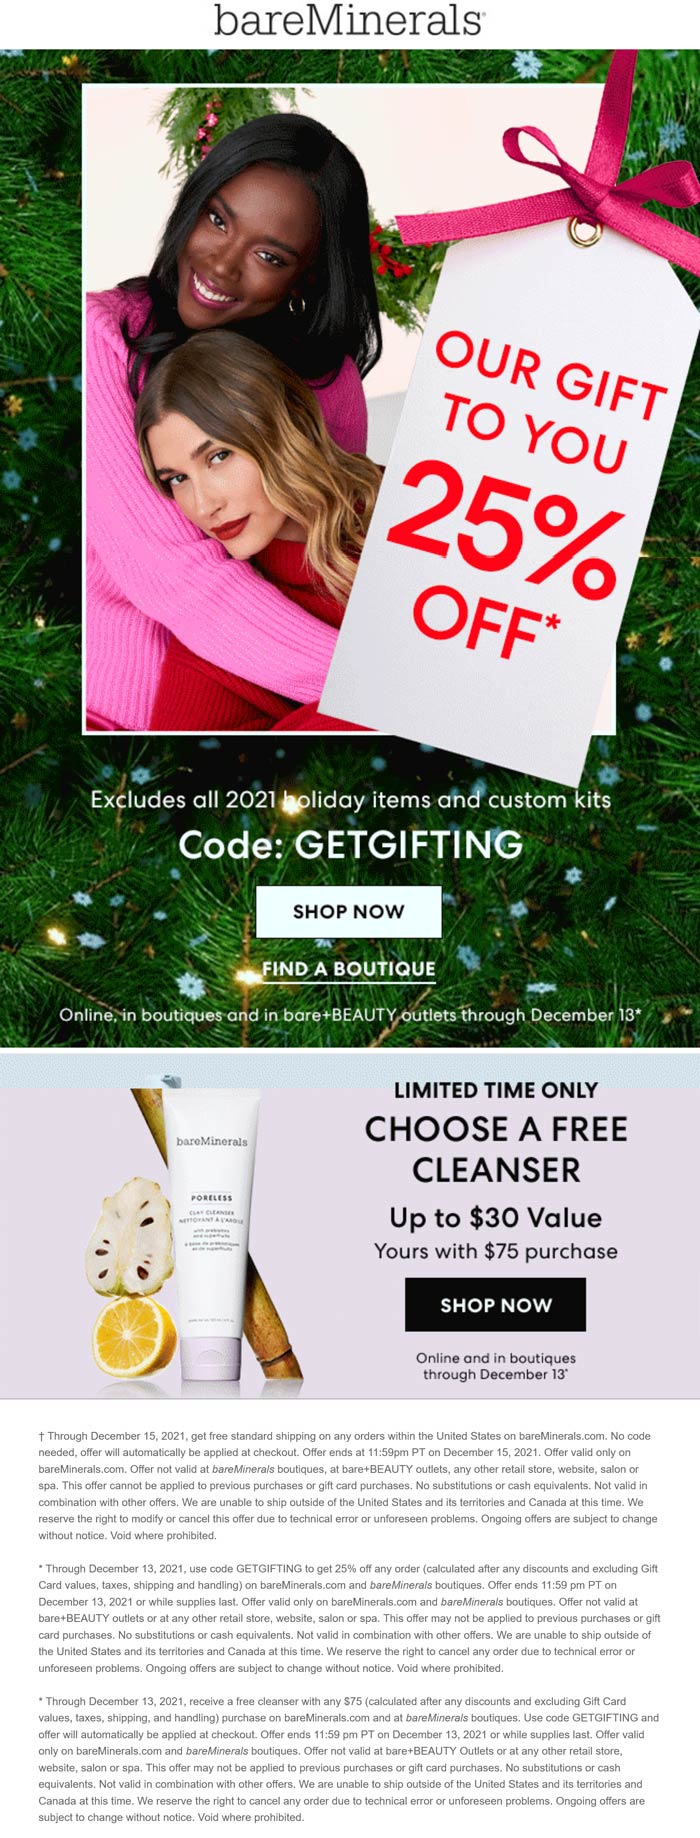 bareMinerals stores Coupon  25% off + free cleanser on $75 at bareMinerals, ditto online #bareminerals 